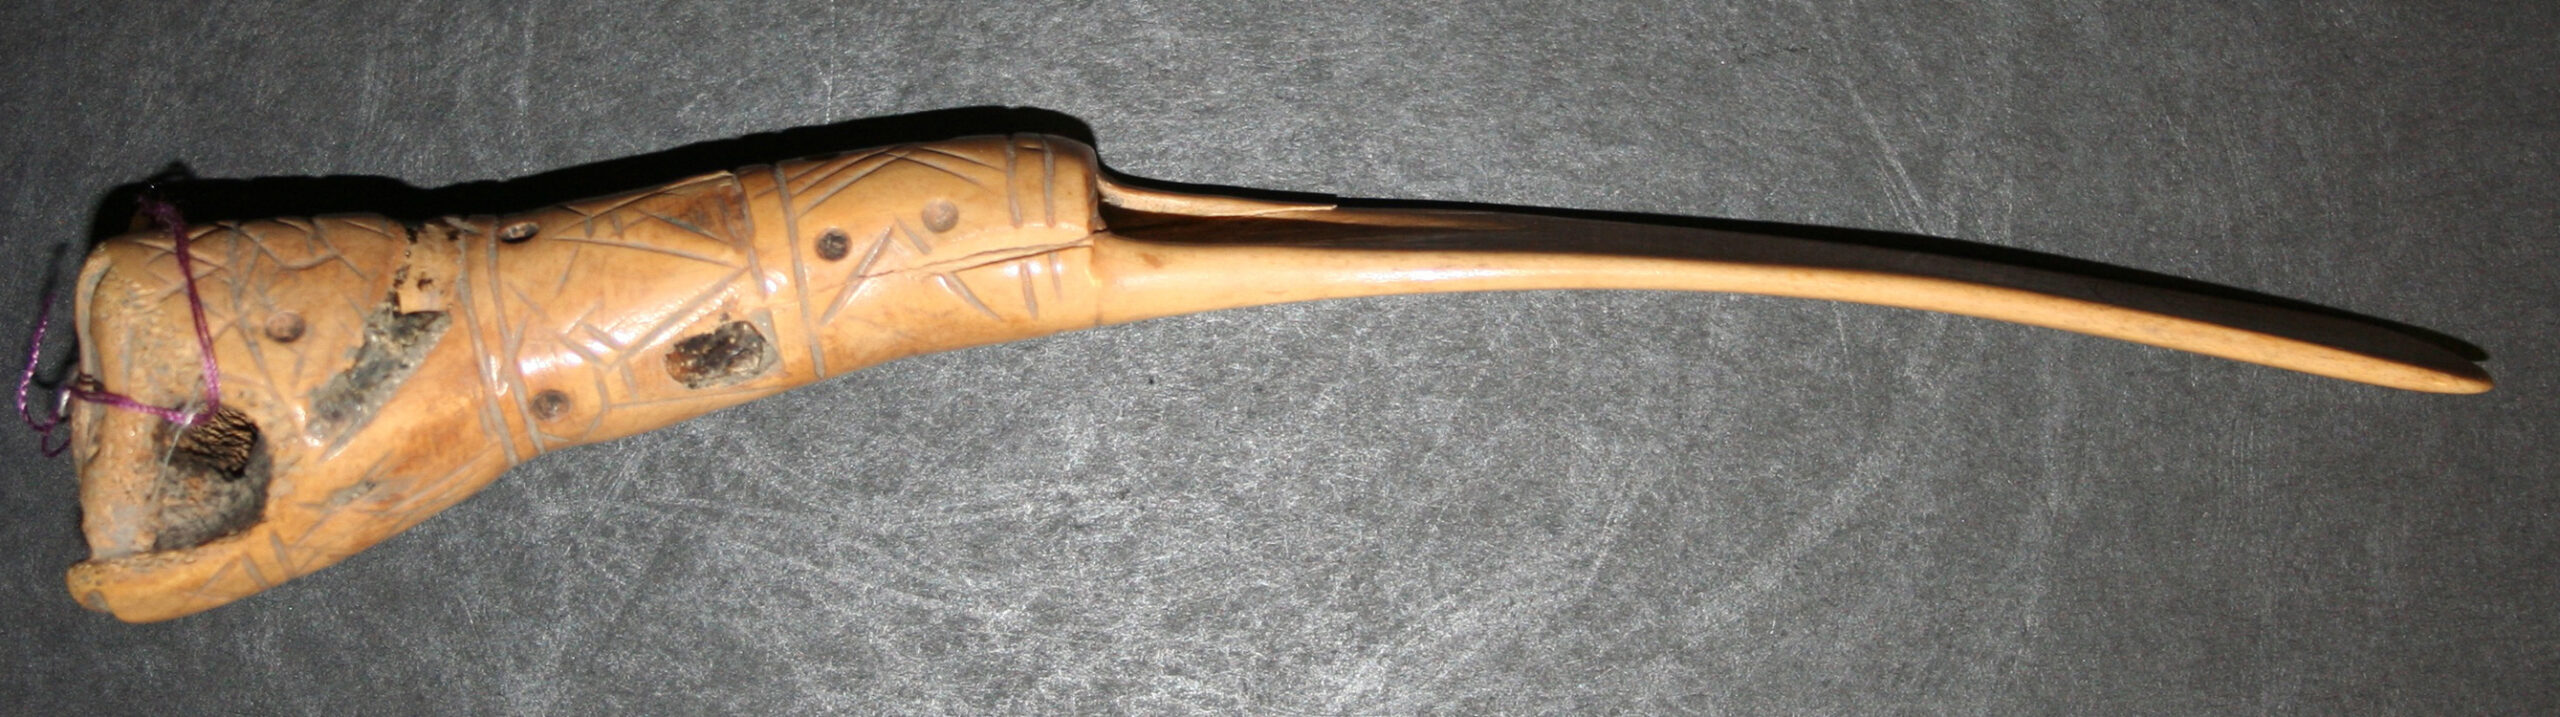 125 Pipe or Dagger Handle